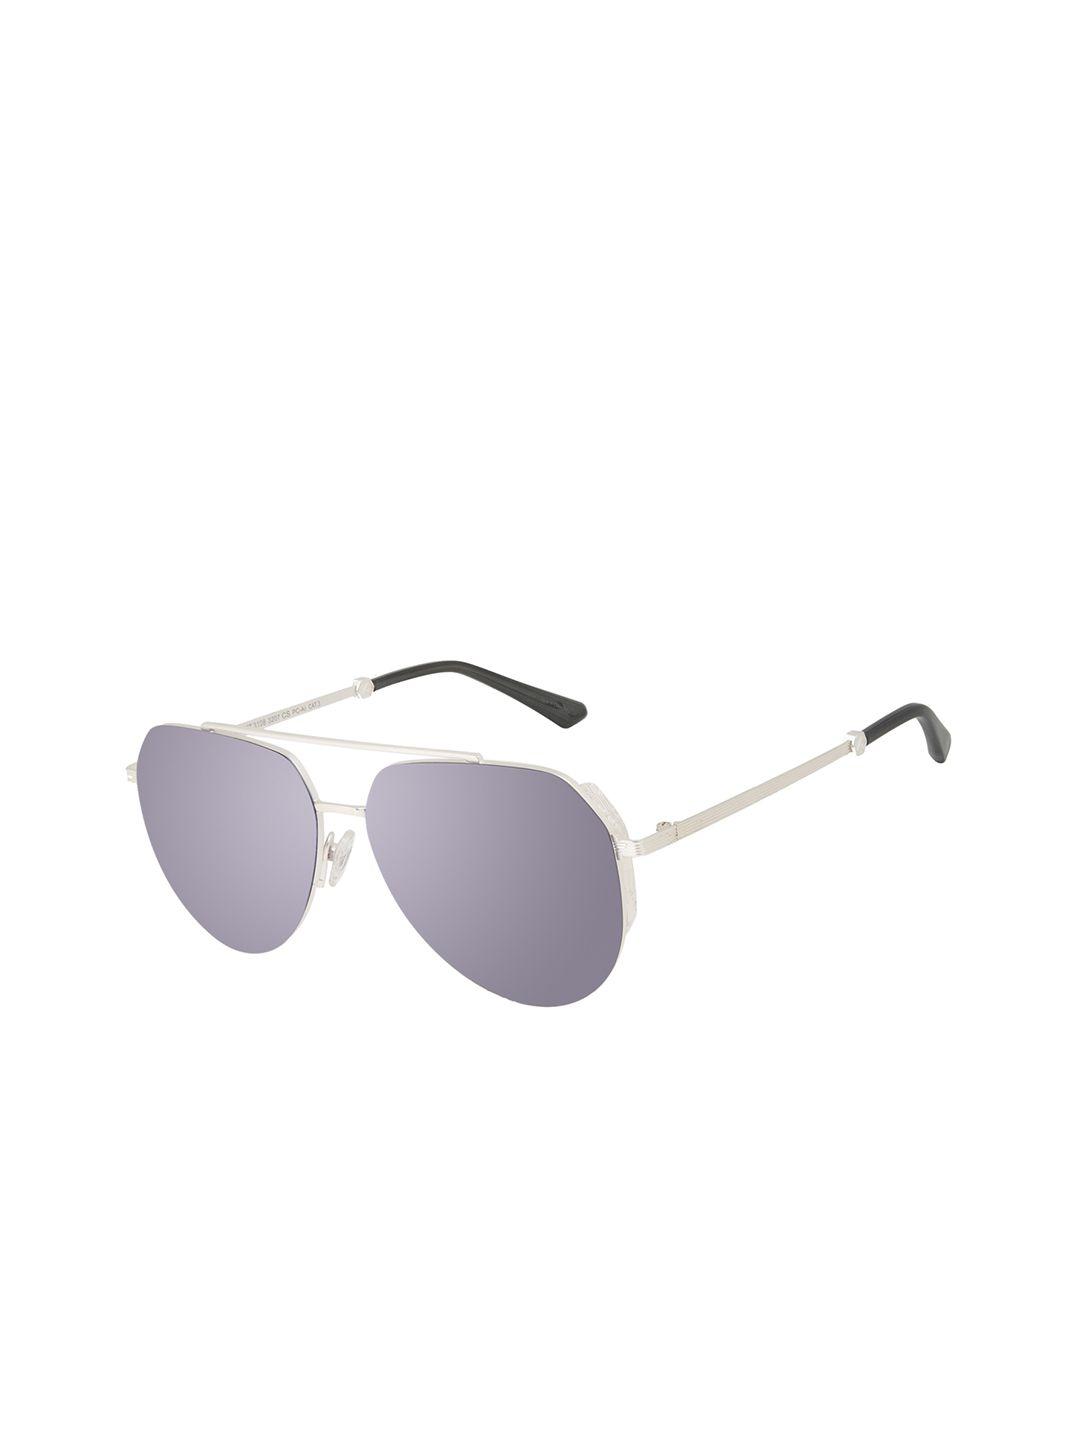 chilli beans unisex grey lens & silver-toned aviator sunglasses with uv protected lens